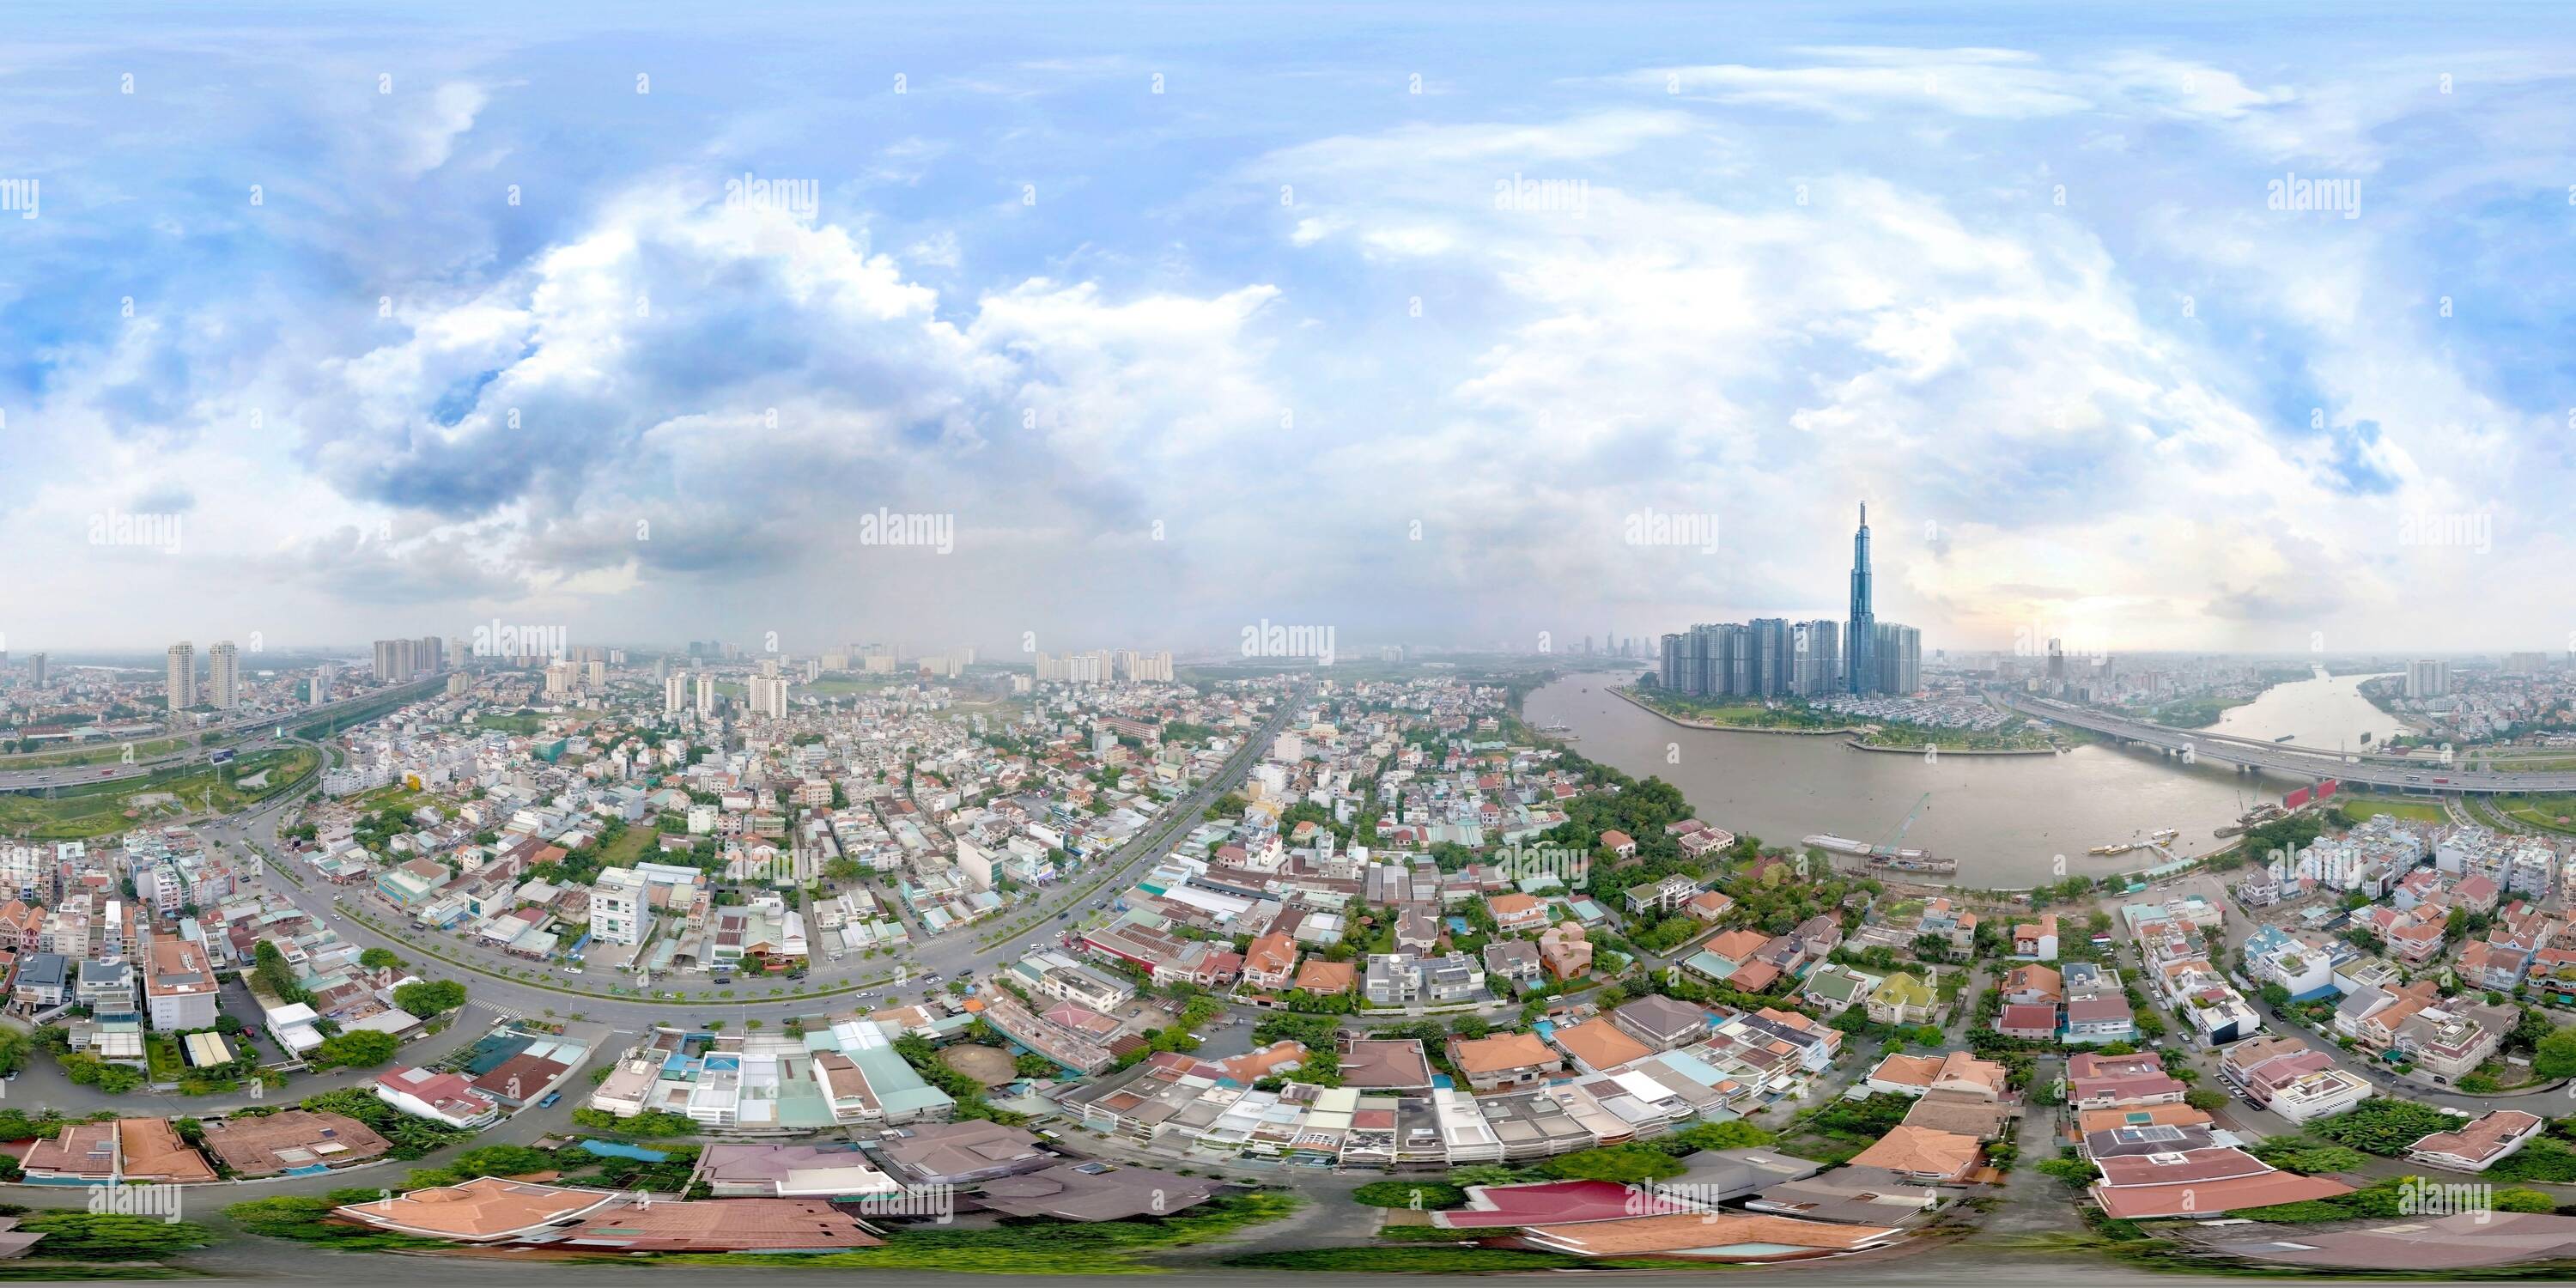 360 degree panoramic view of 360 VR taken over Binh An, HCMC, with views of Saigon Bridge, Vietnam's tallest building, and District 1 on the horizon.